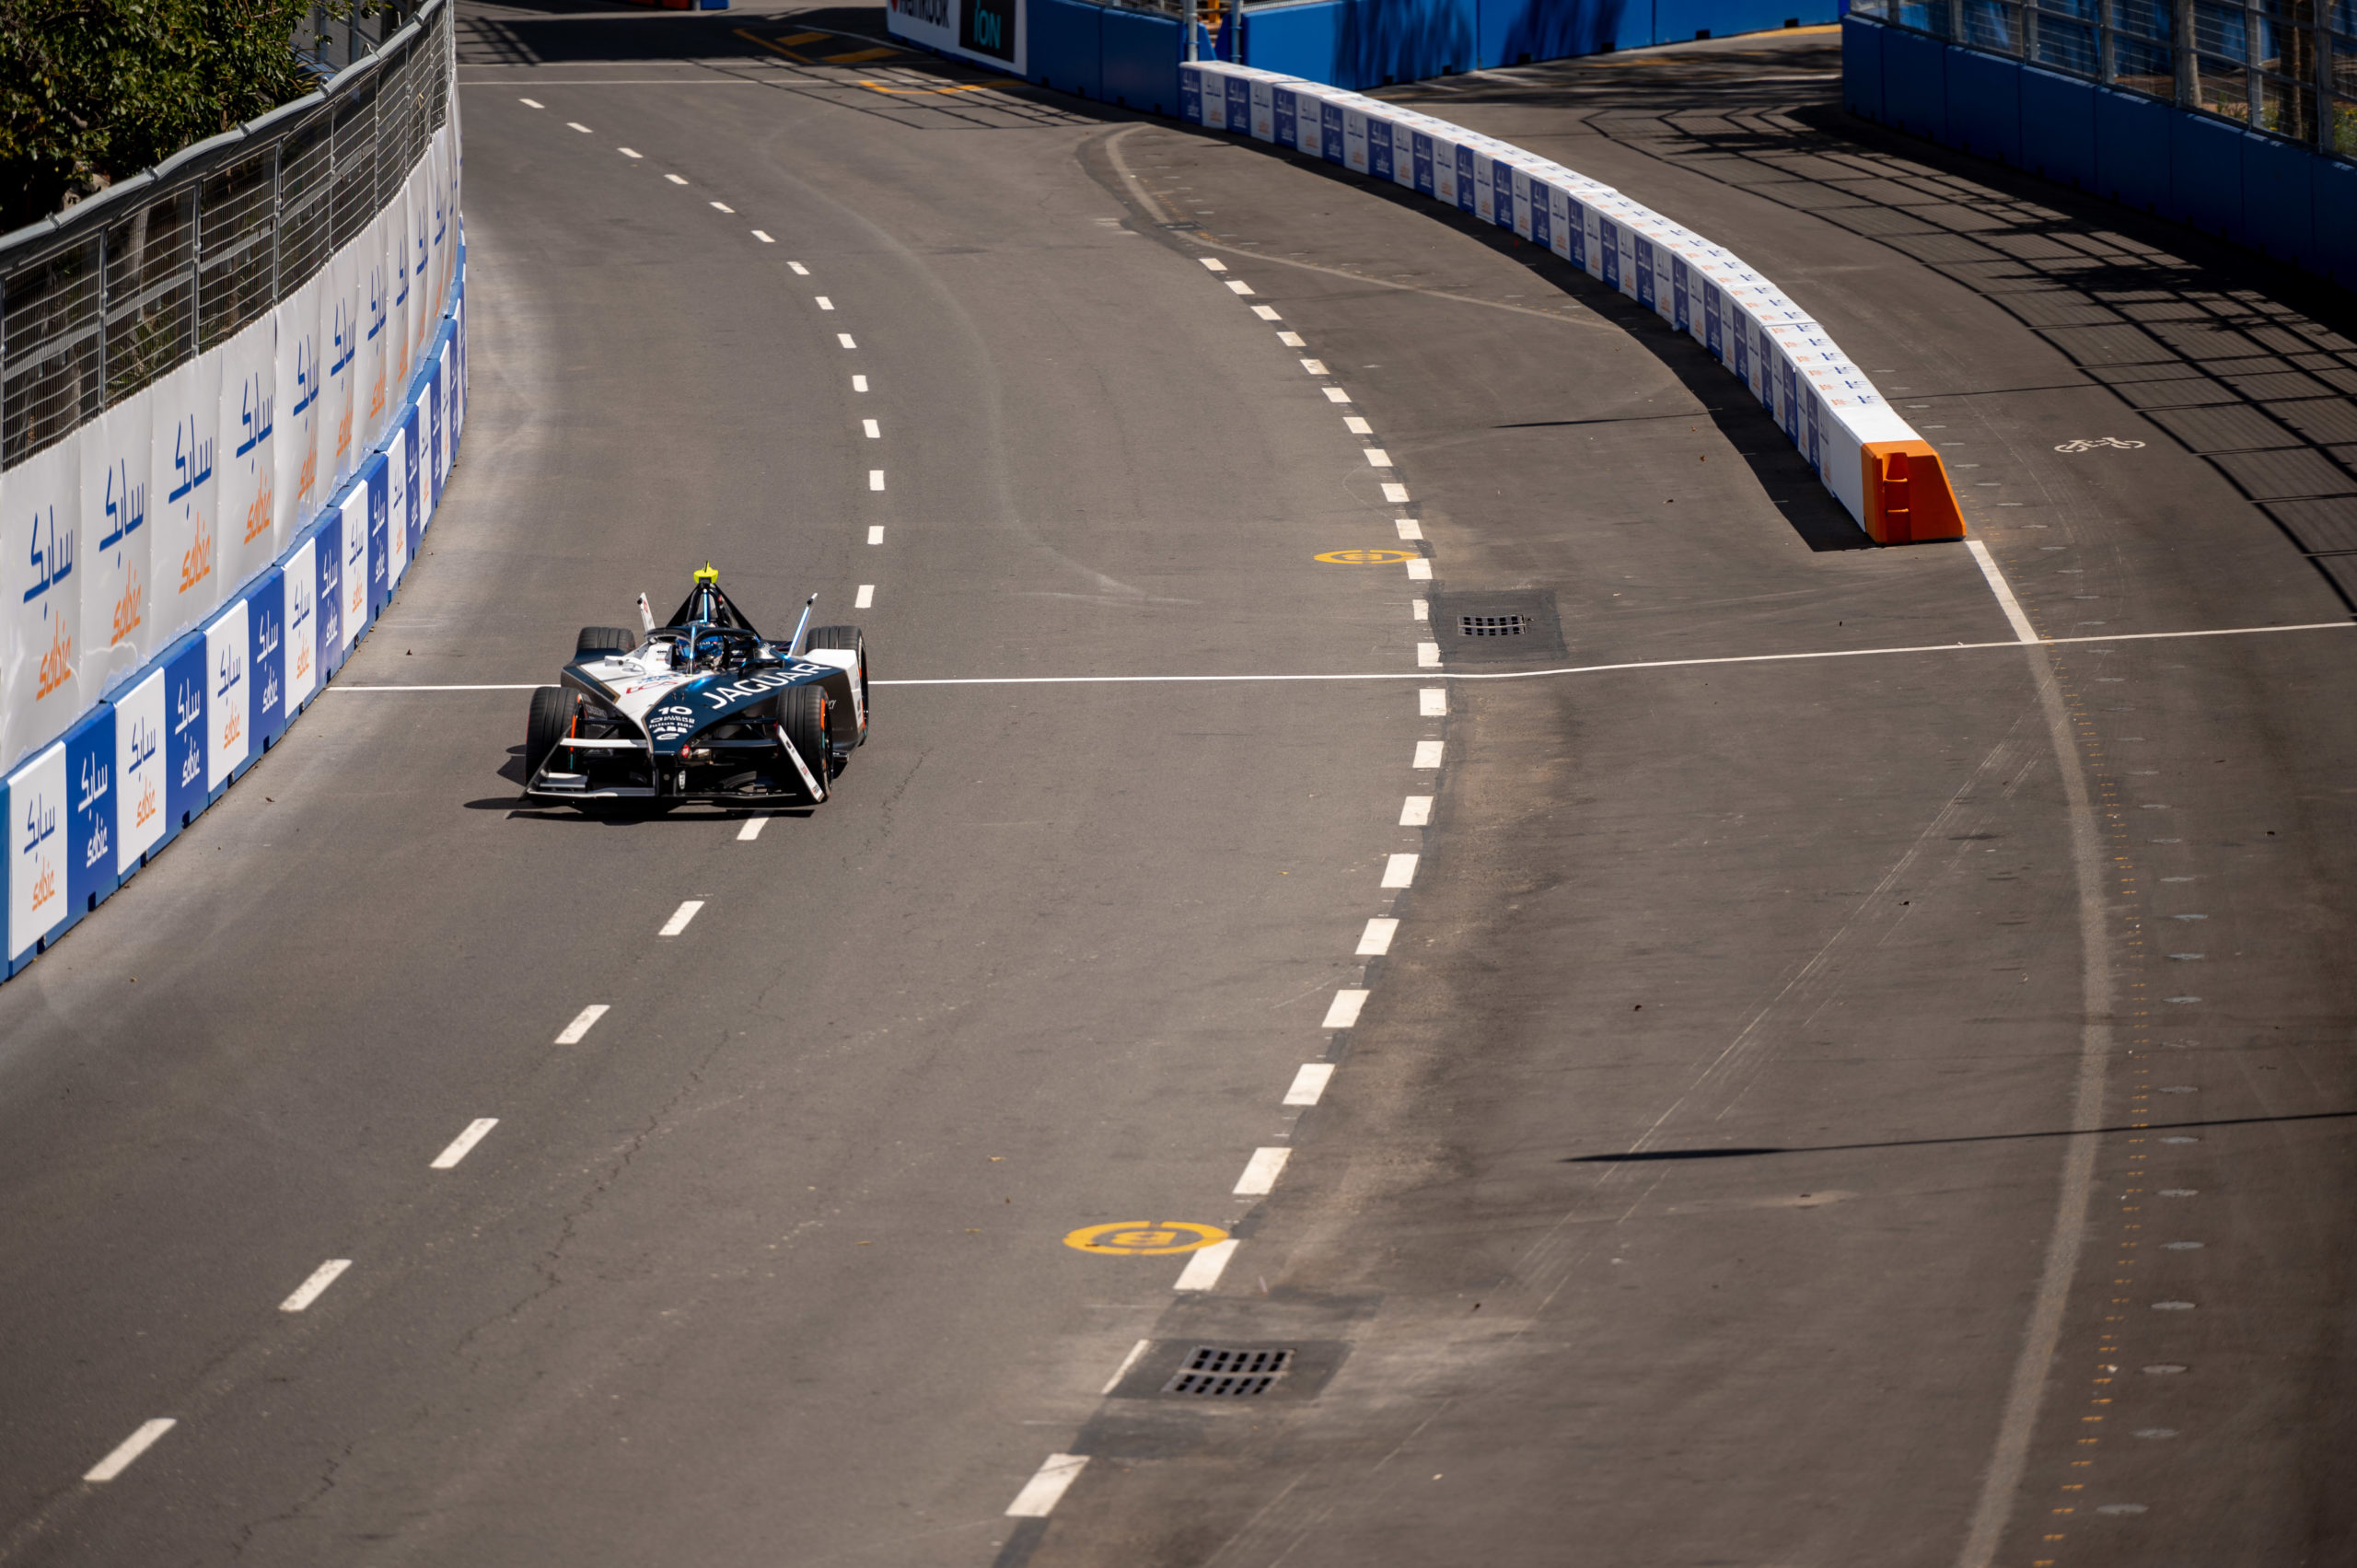 the ‘dating’ process behind every new formula e race